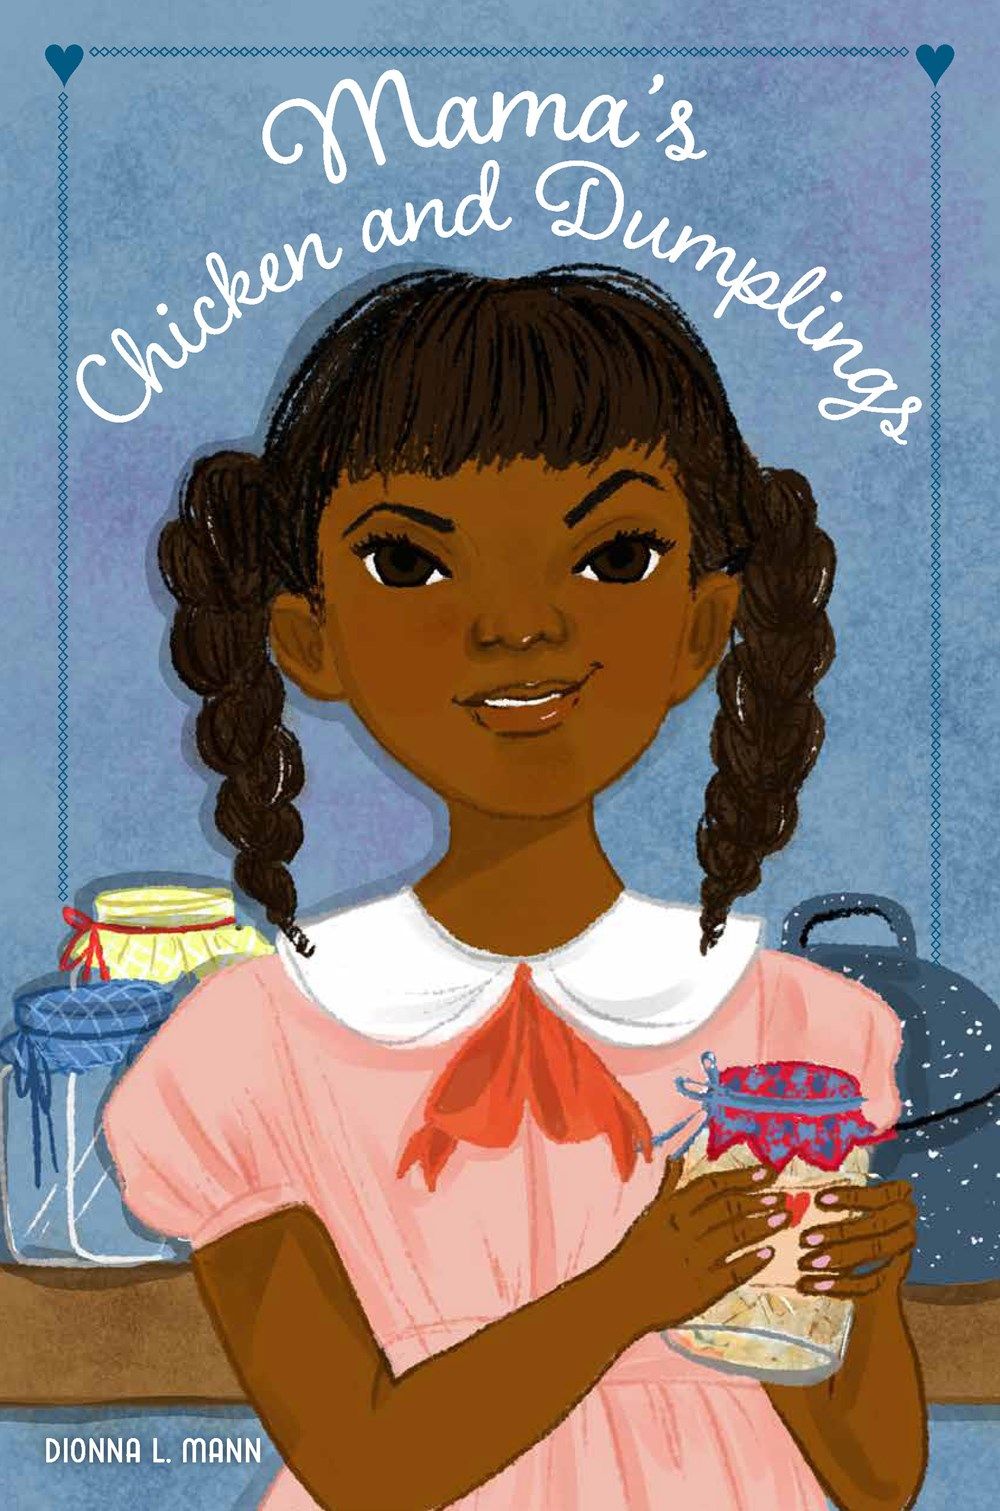 Cover of Mama's Chicken and Dumplings by Dionna L. Mann